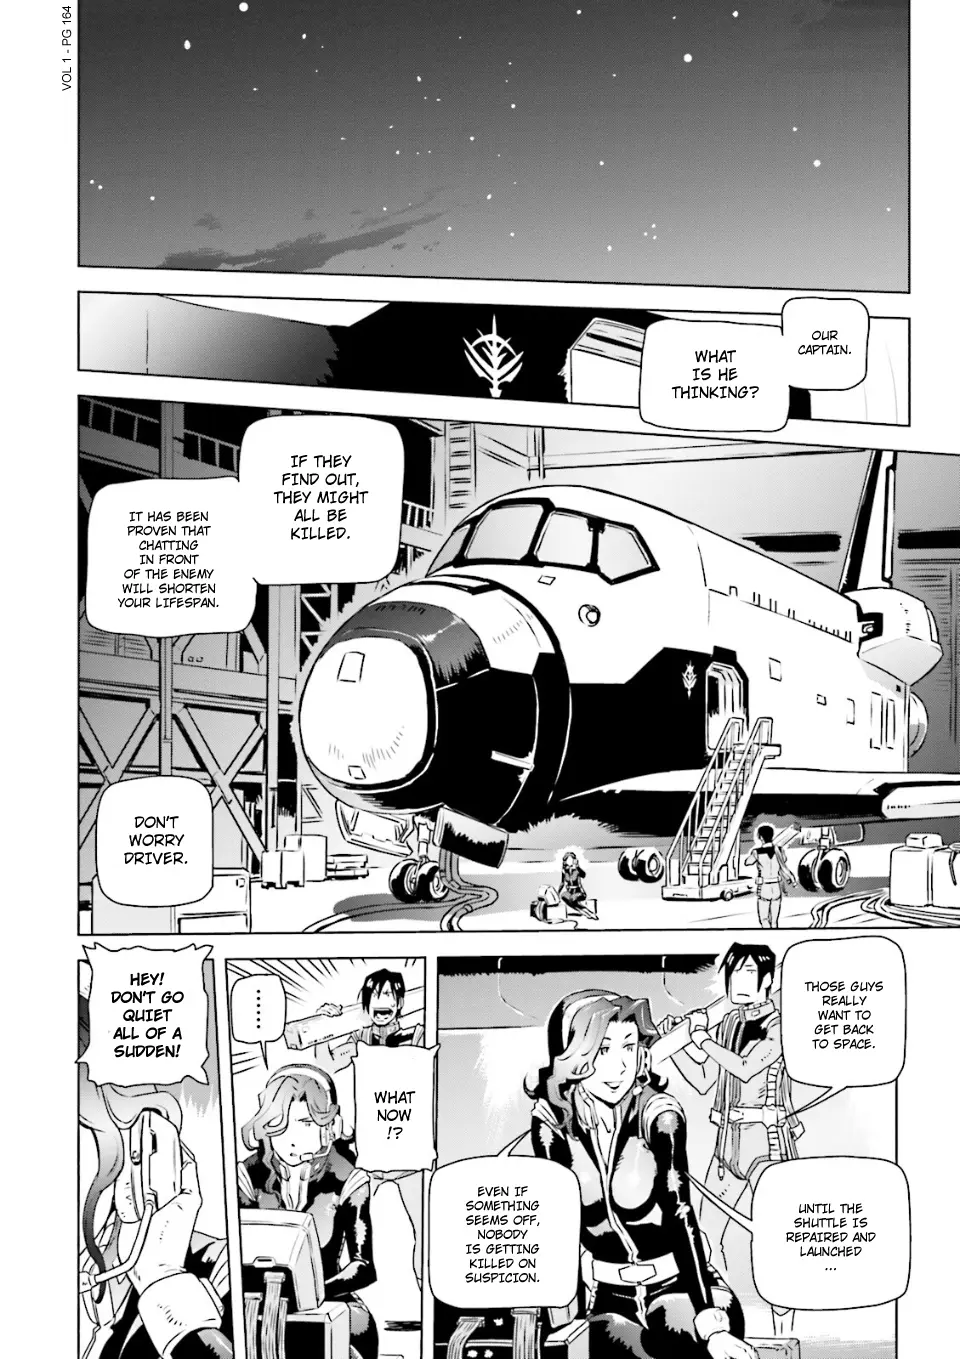 Mobile Suit Gundam Side Story - Missing Link - 6 page 16-2126b6c6